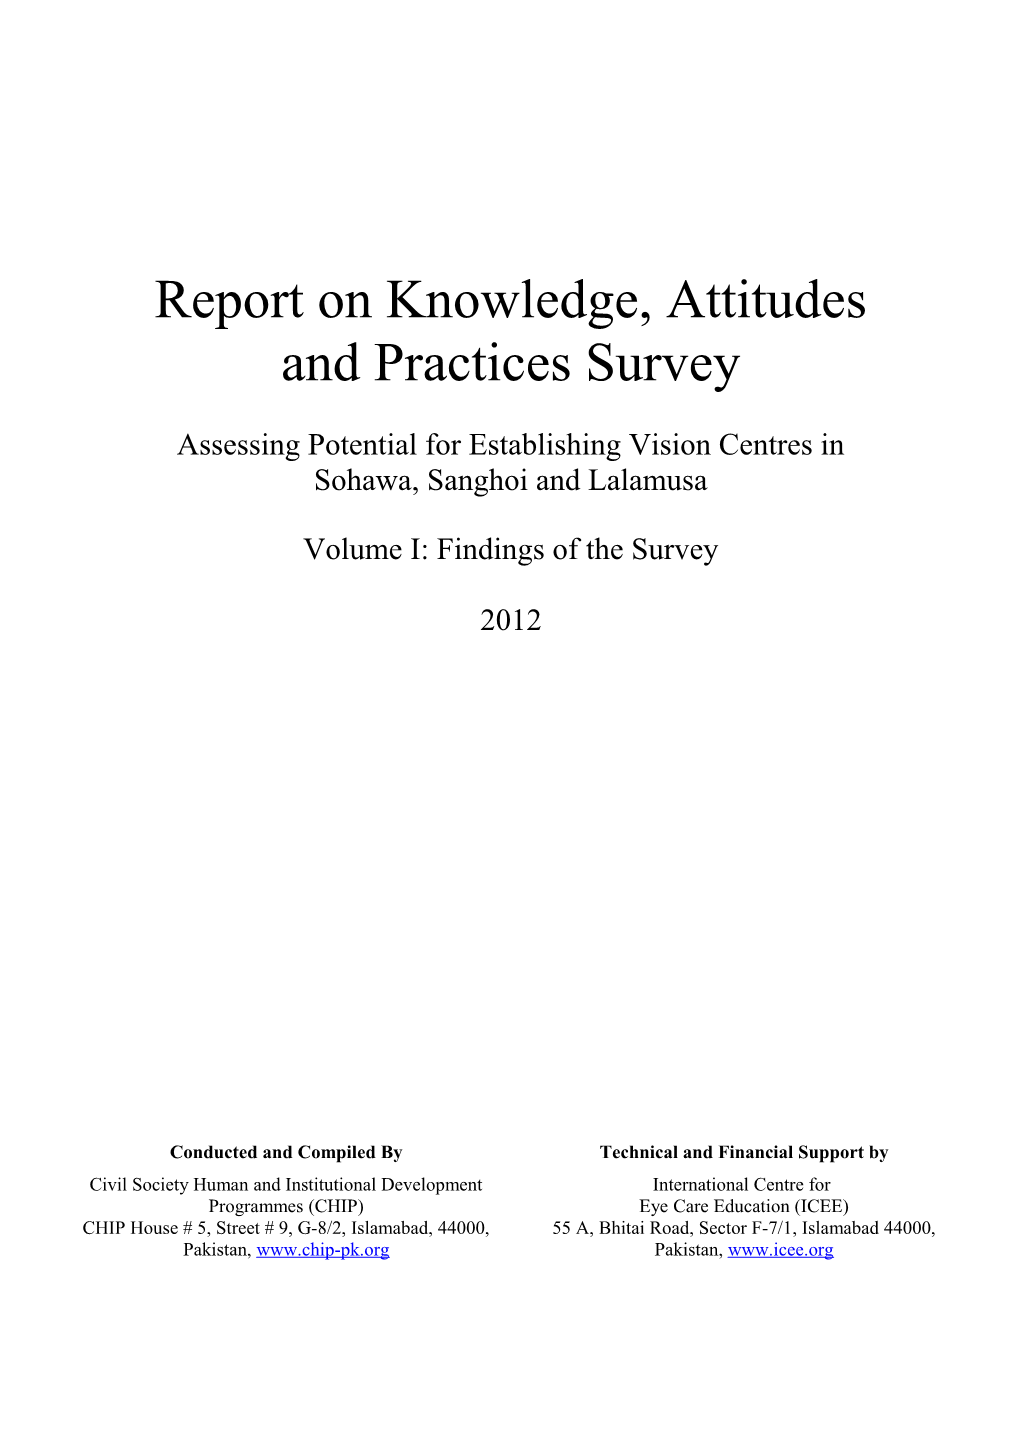 Report on Knowledge, Attitudes and Practices Survey